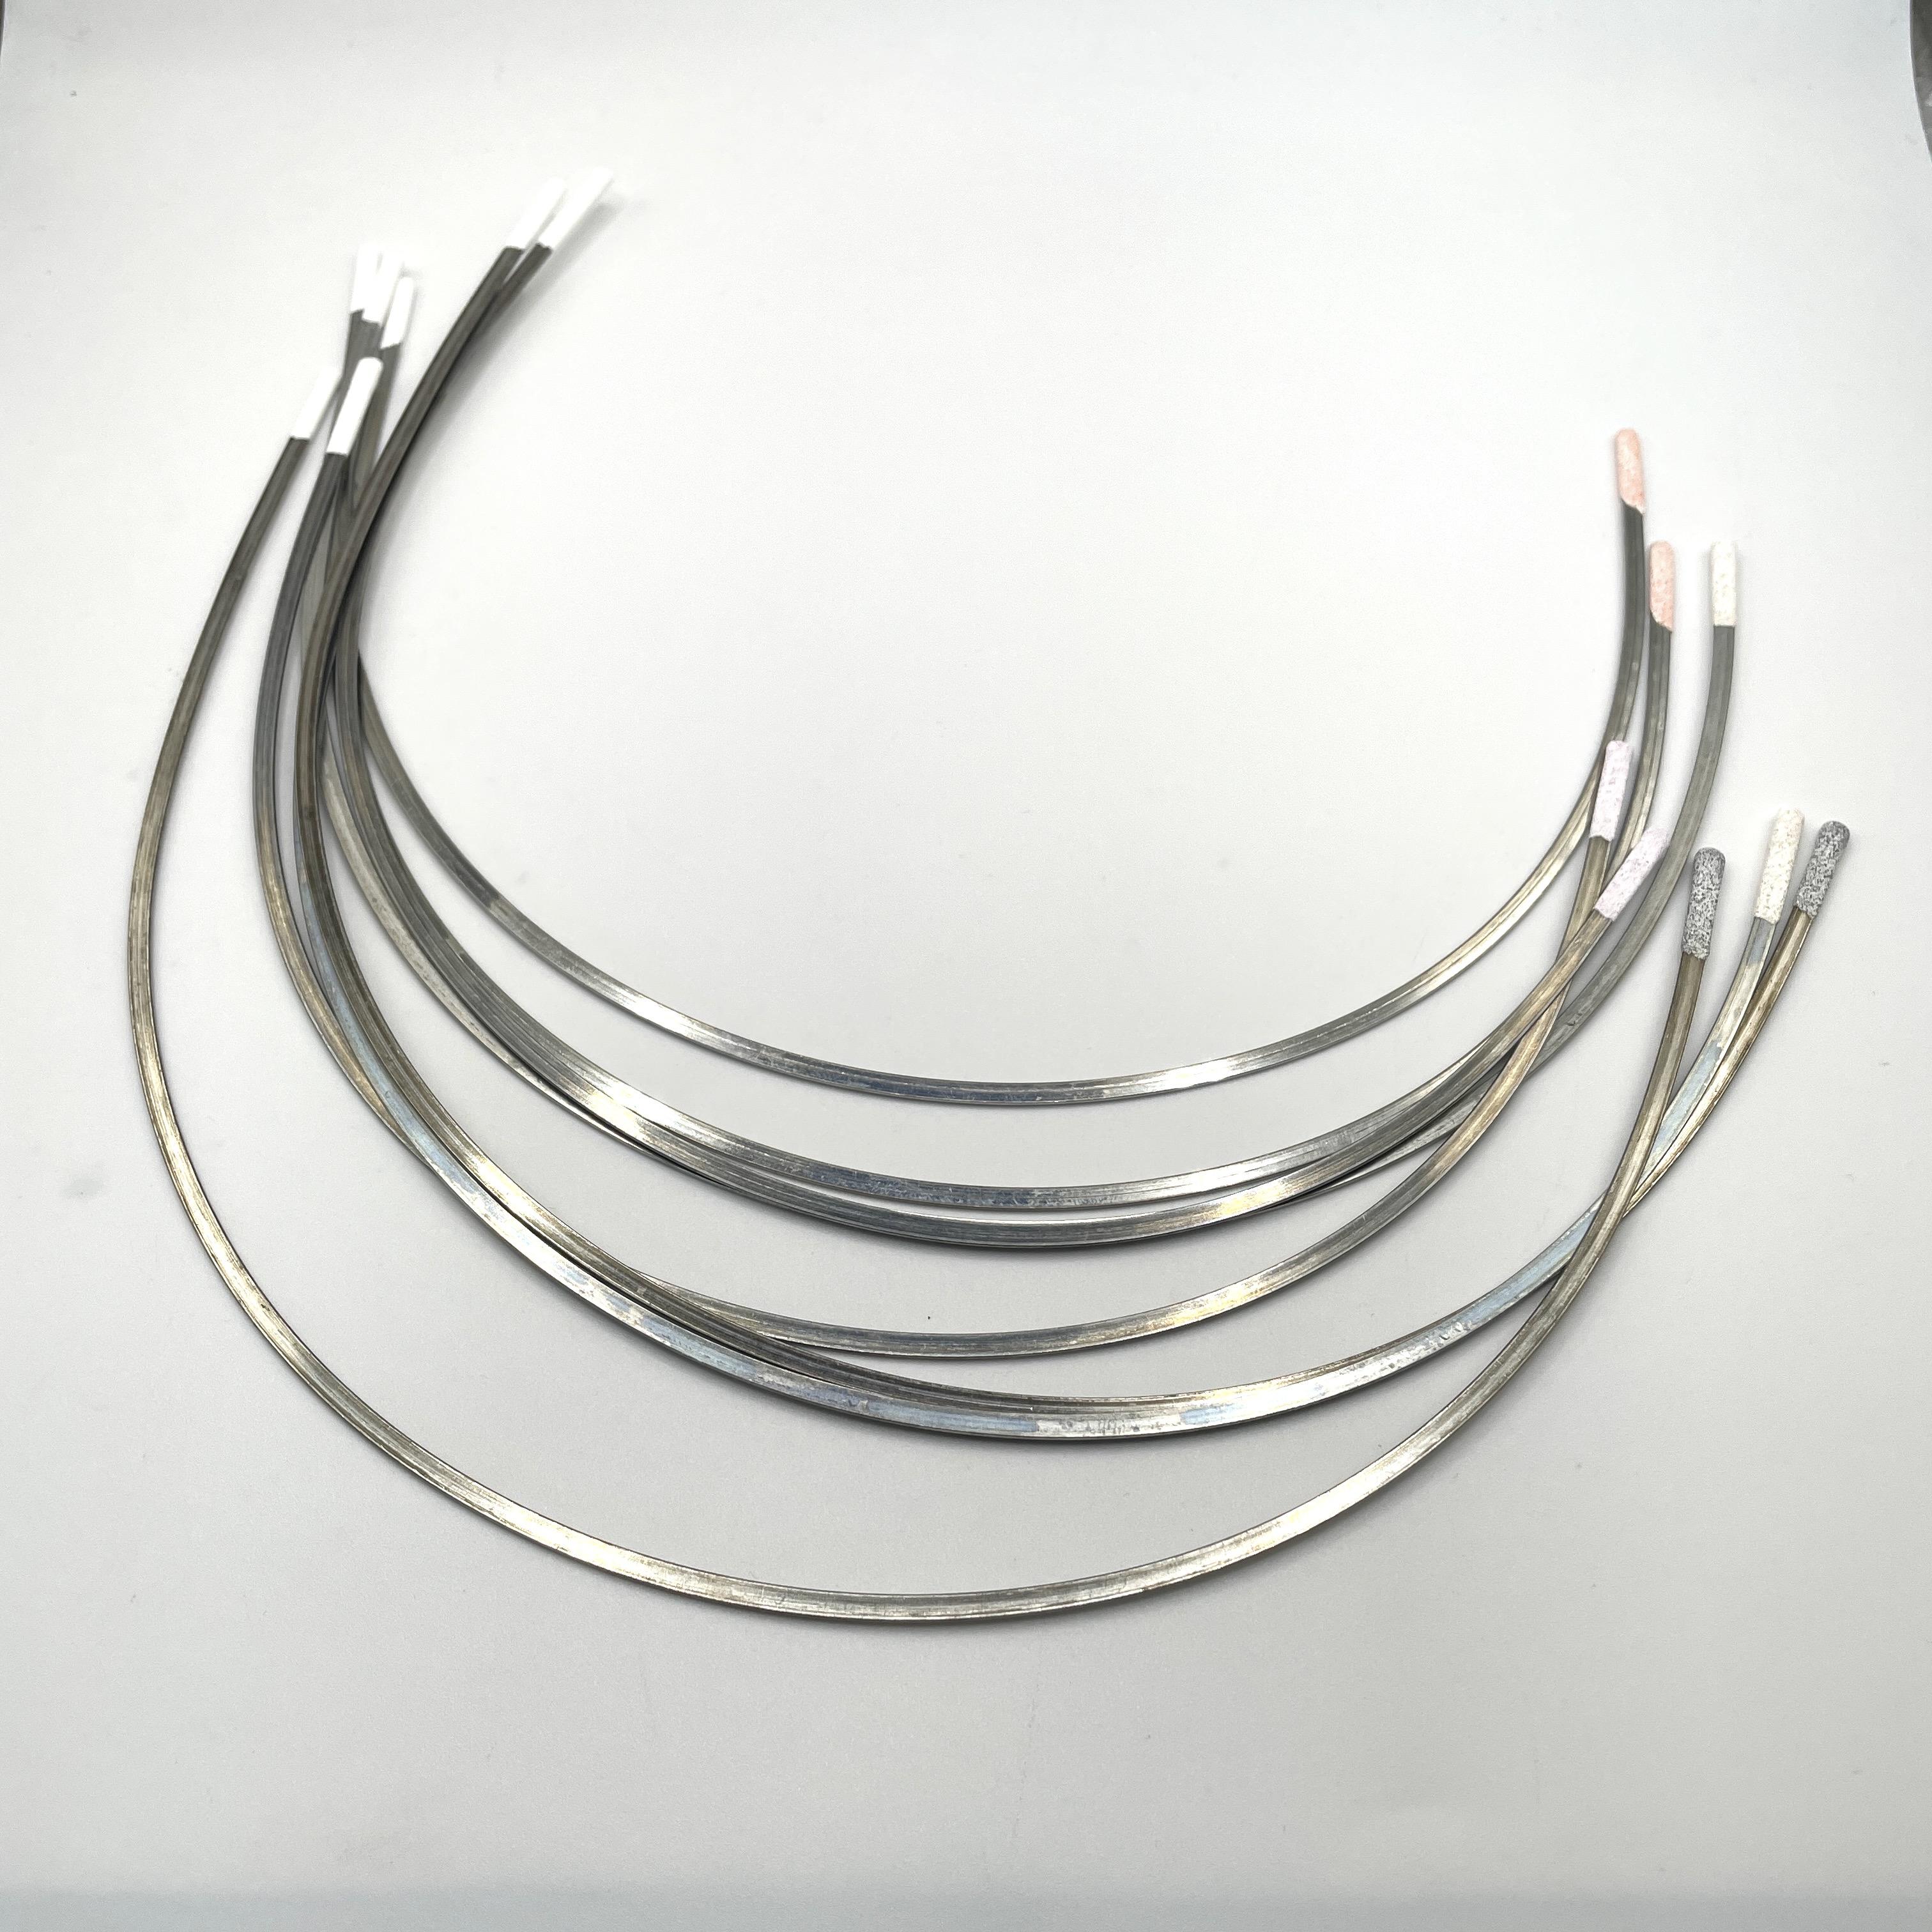 Underwires 46C (44D/42E/40F) (Flat Wire) - One Pair